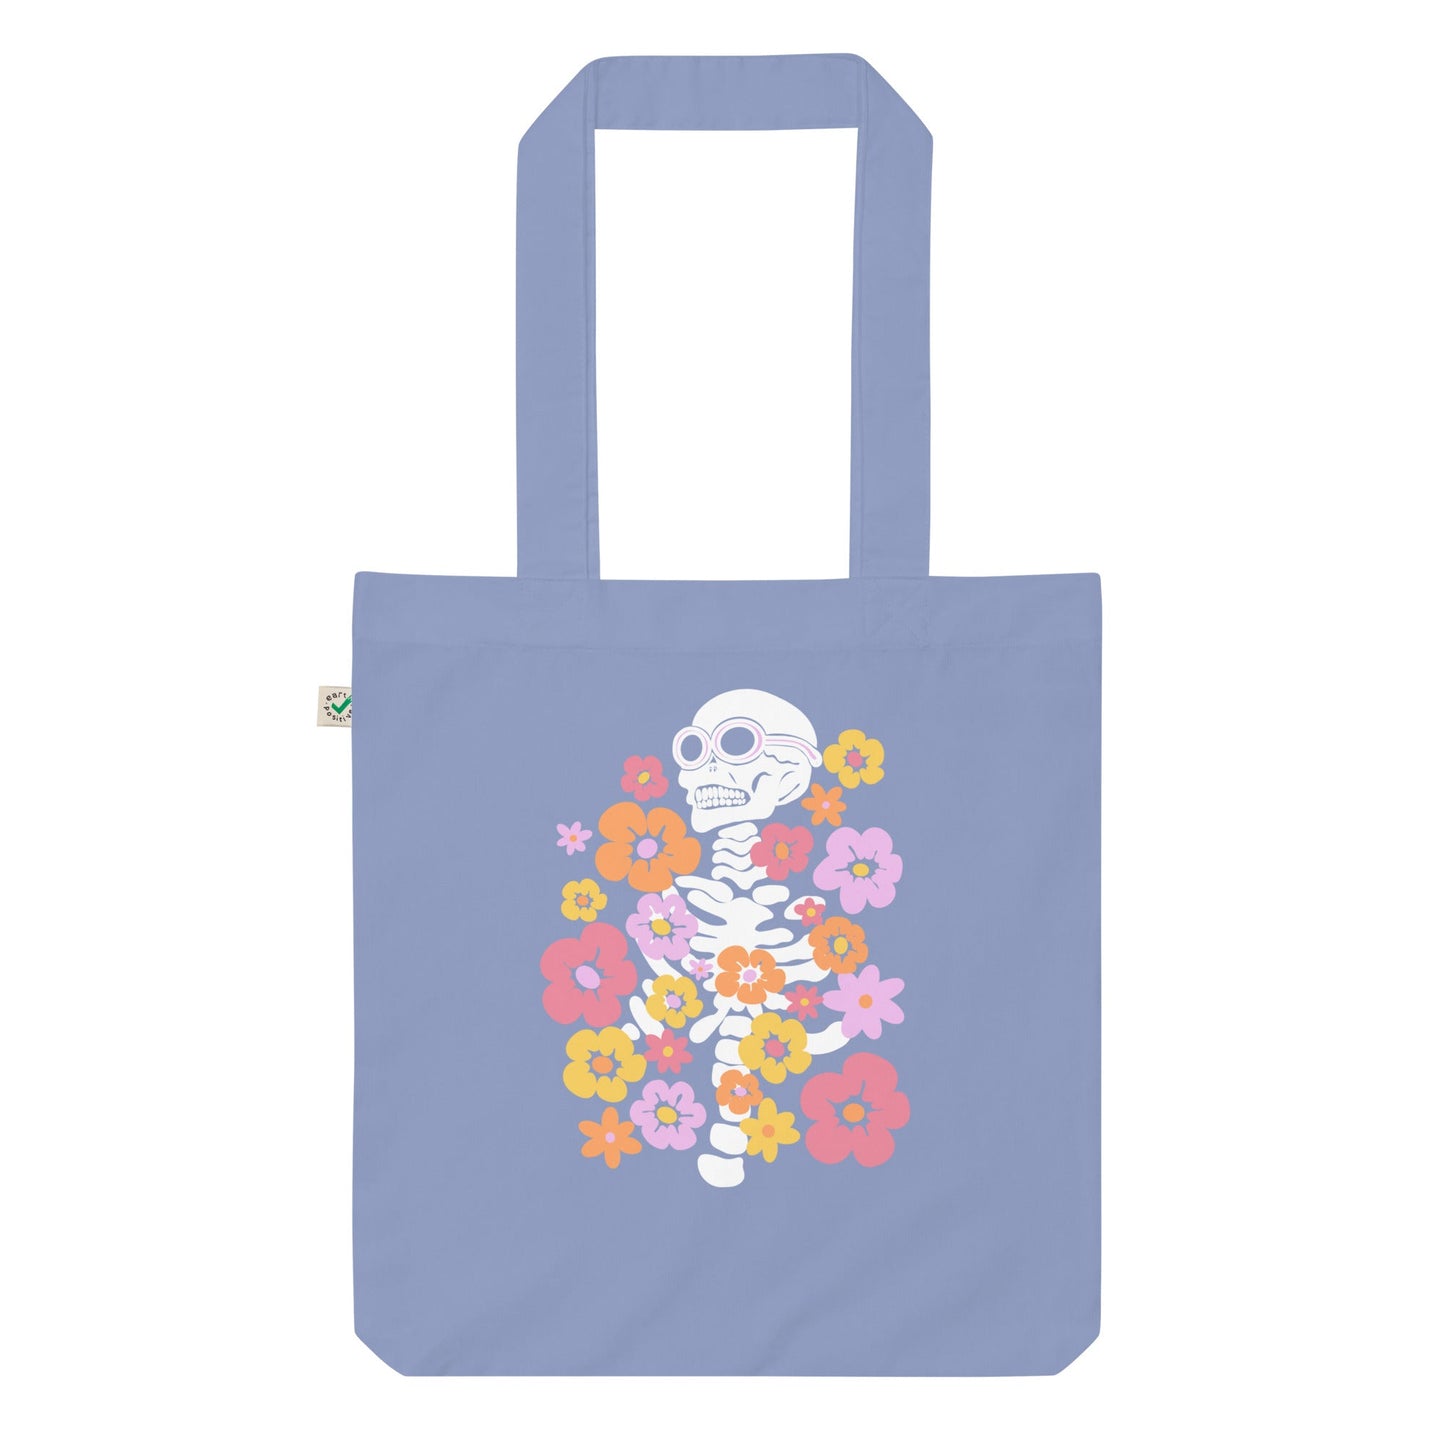 Stay Groovy Tote